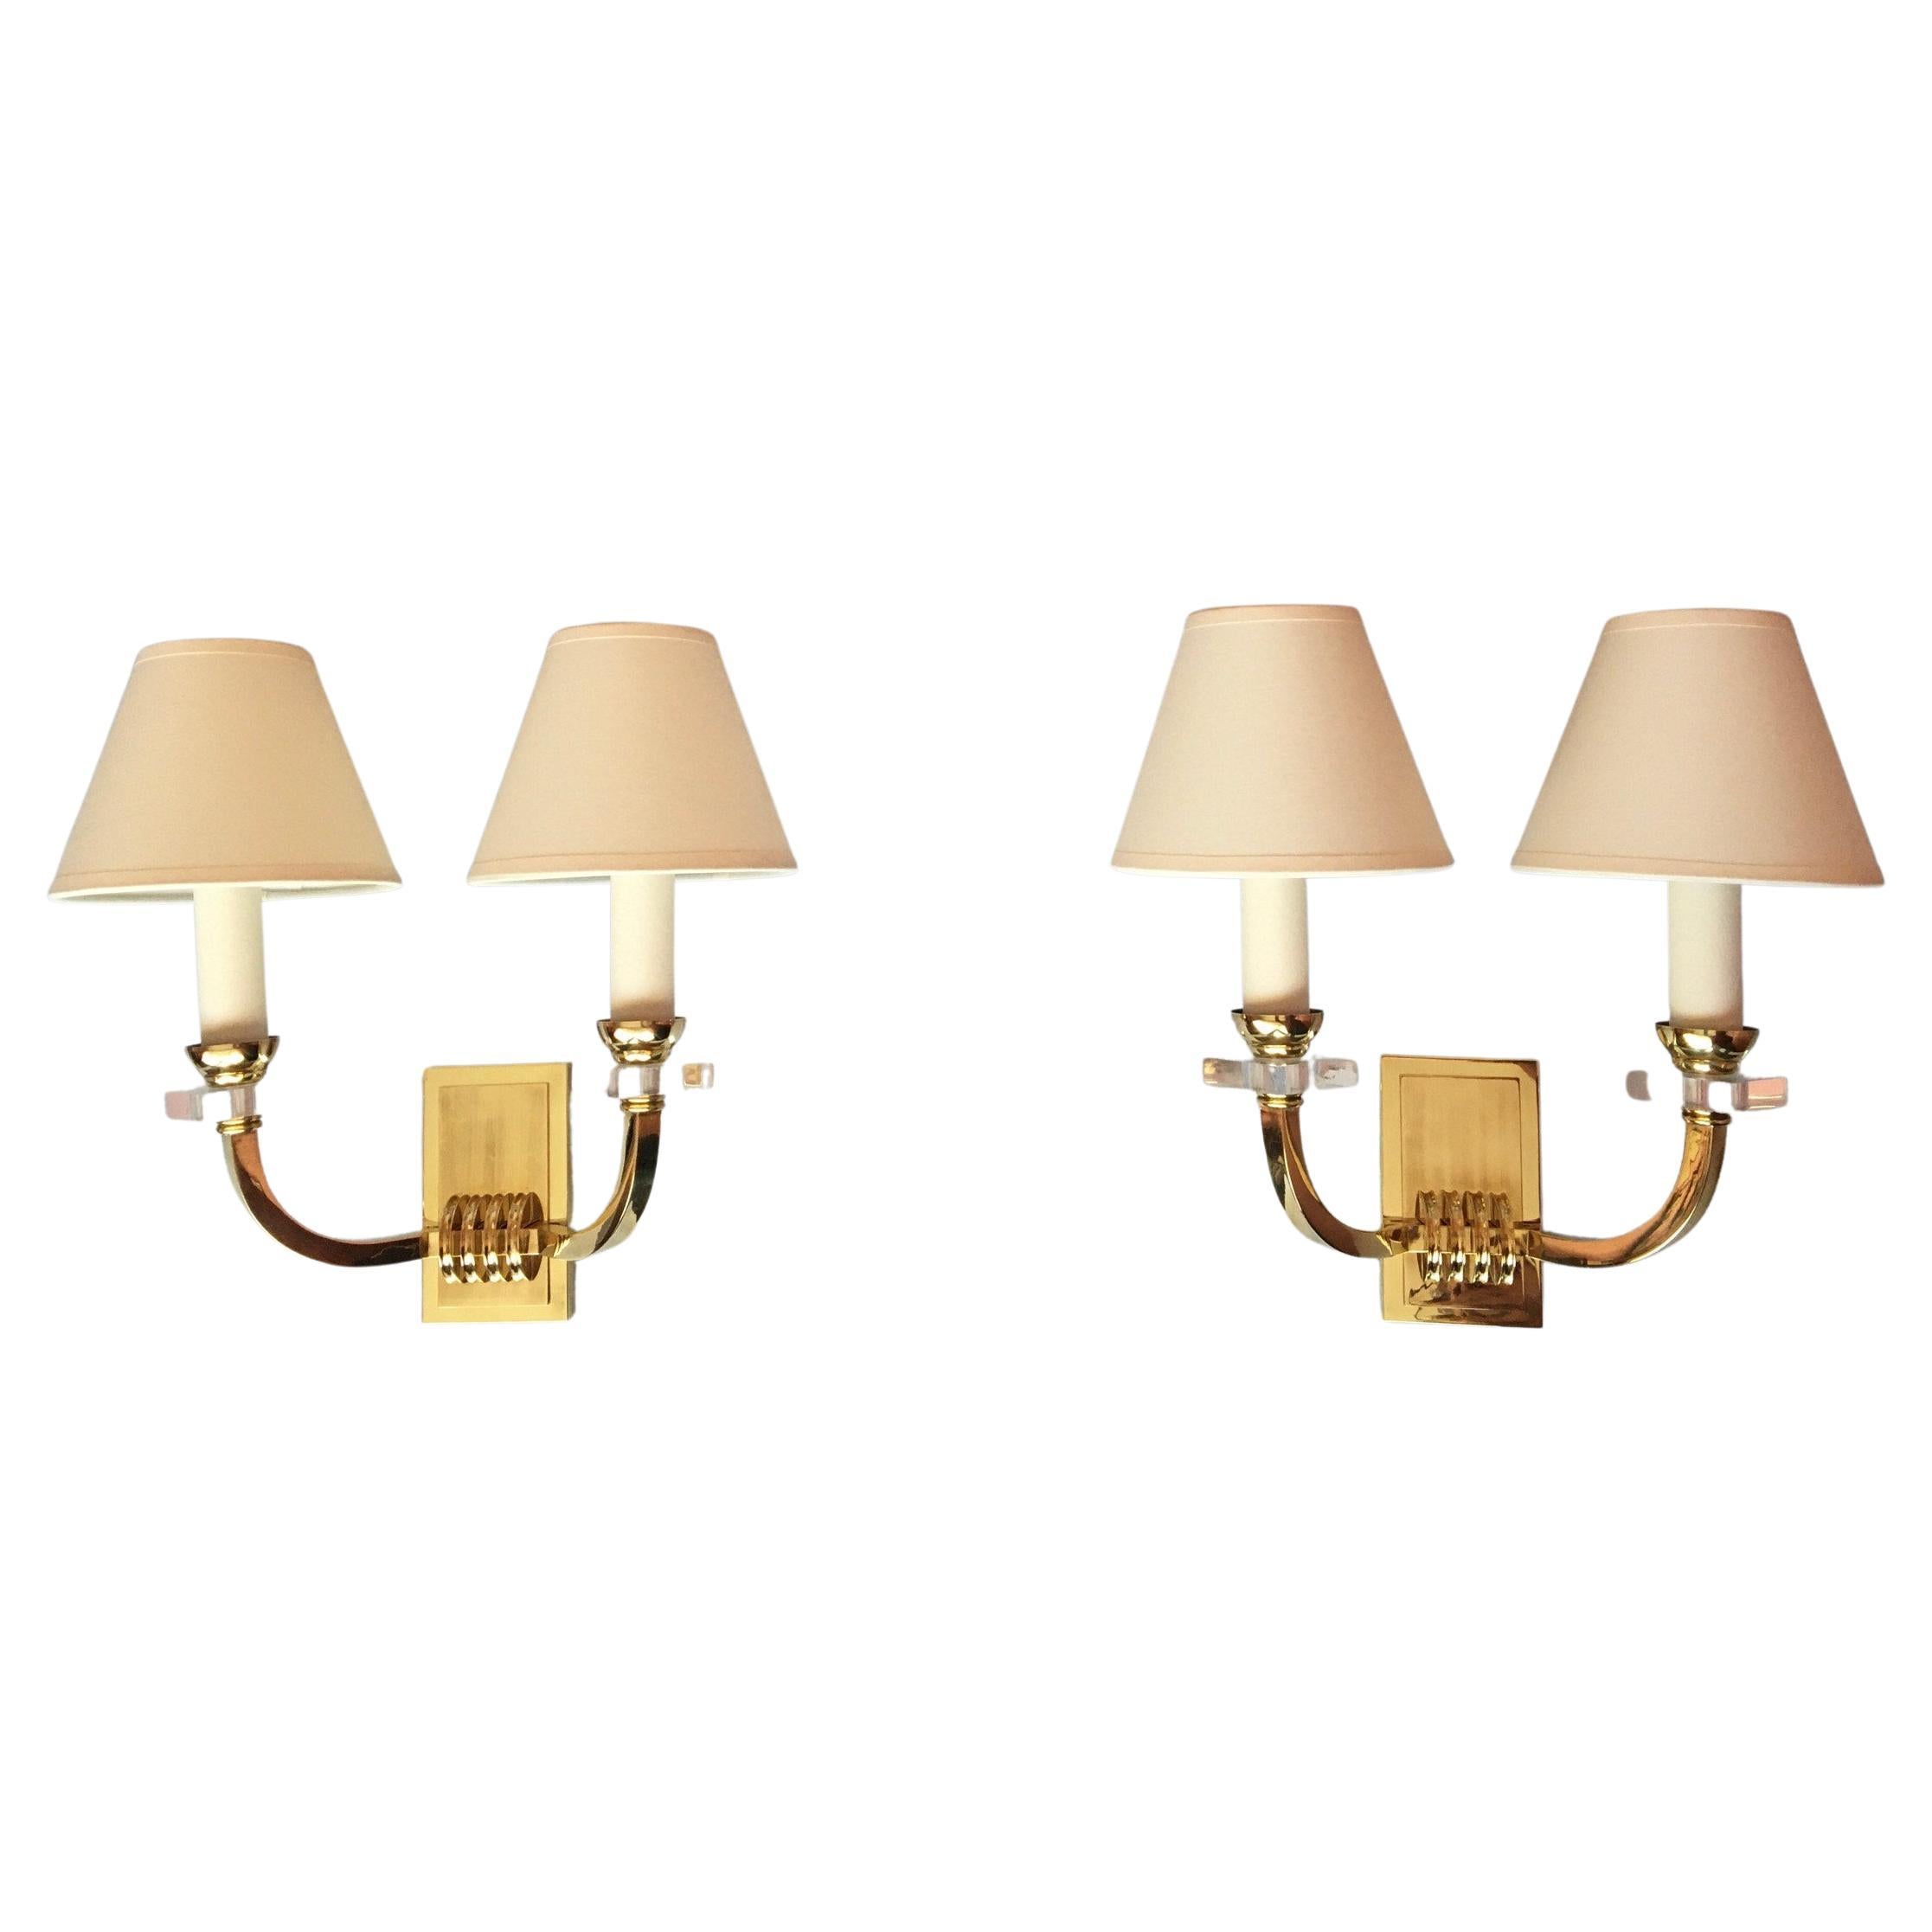 Jacques Adnet Neoclassical Pair of Bronze Sconces, France, 1950